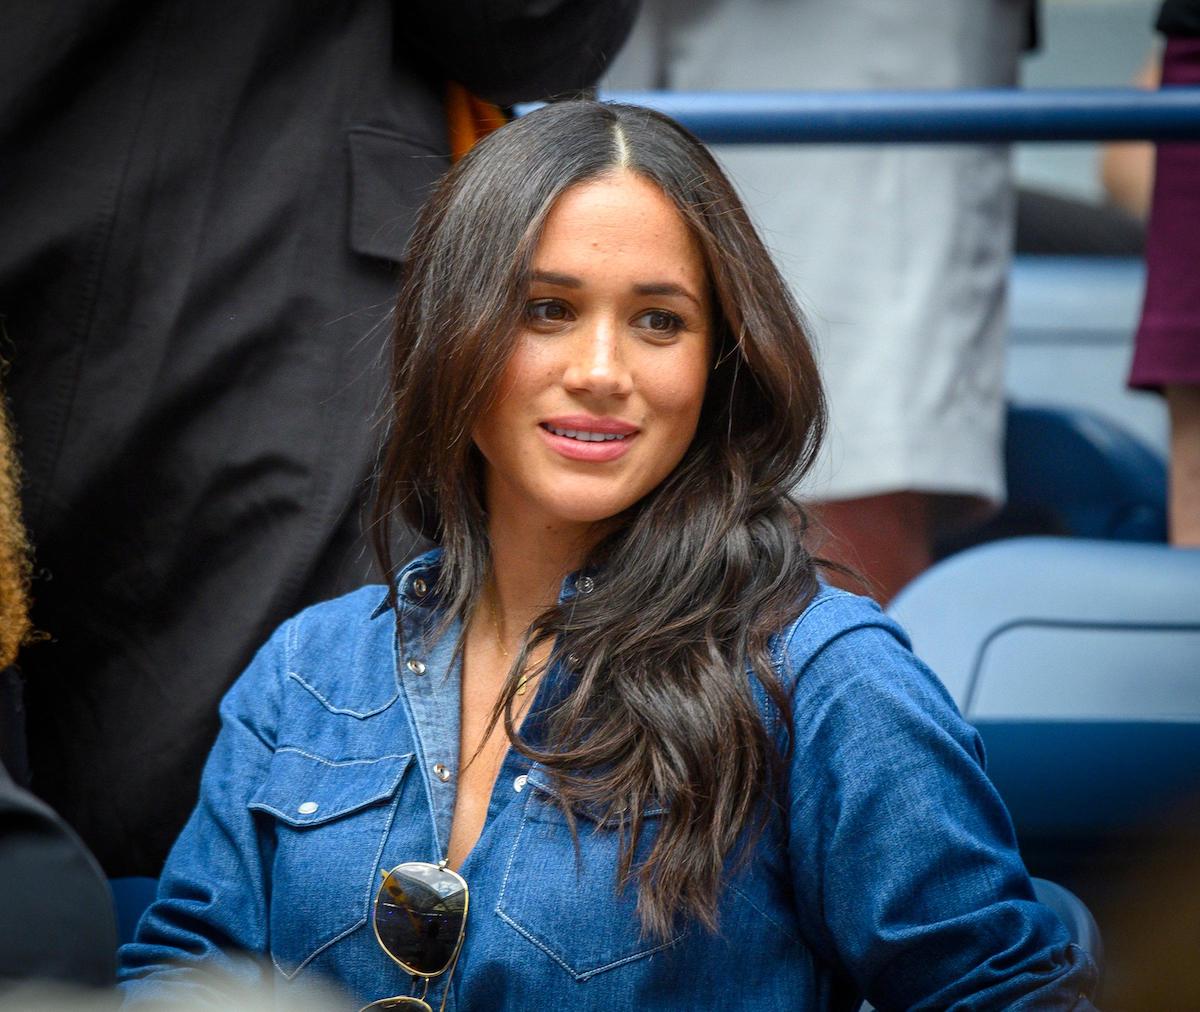 Meghan Markle, Duchess of Sussex was in Serena Williams' box during the Williams match against Bianca Andreescu of Canada during the Women's Final at the US Open at the USTA Billie Jean King National Tennis Center in Flushing, New York on Saturday, September 7, 2019